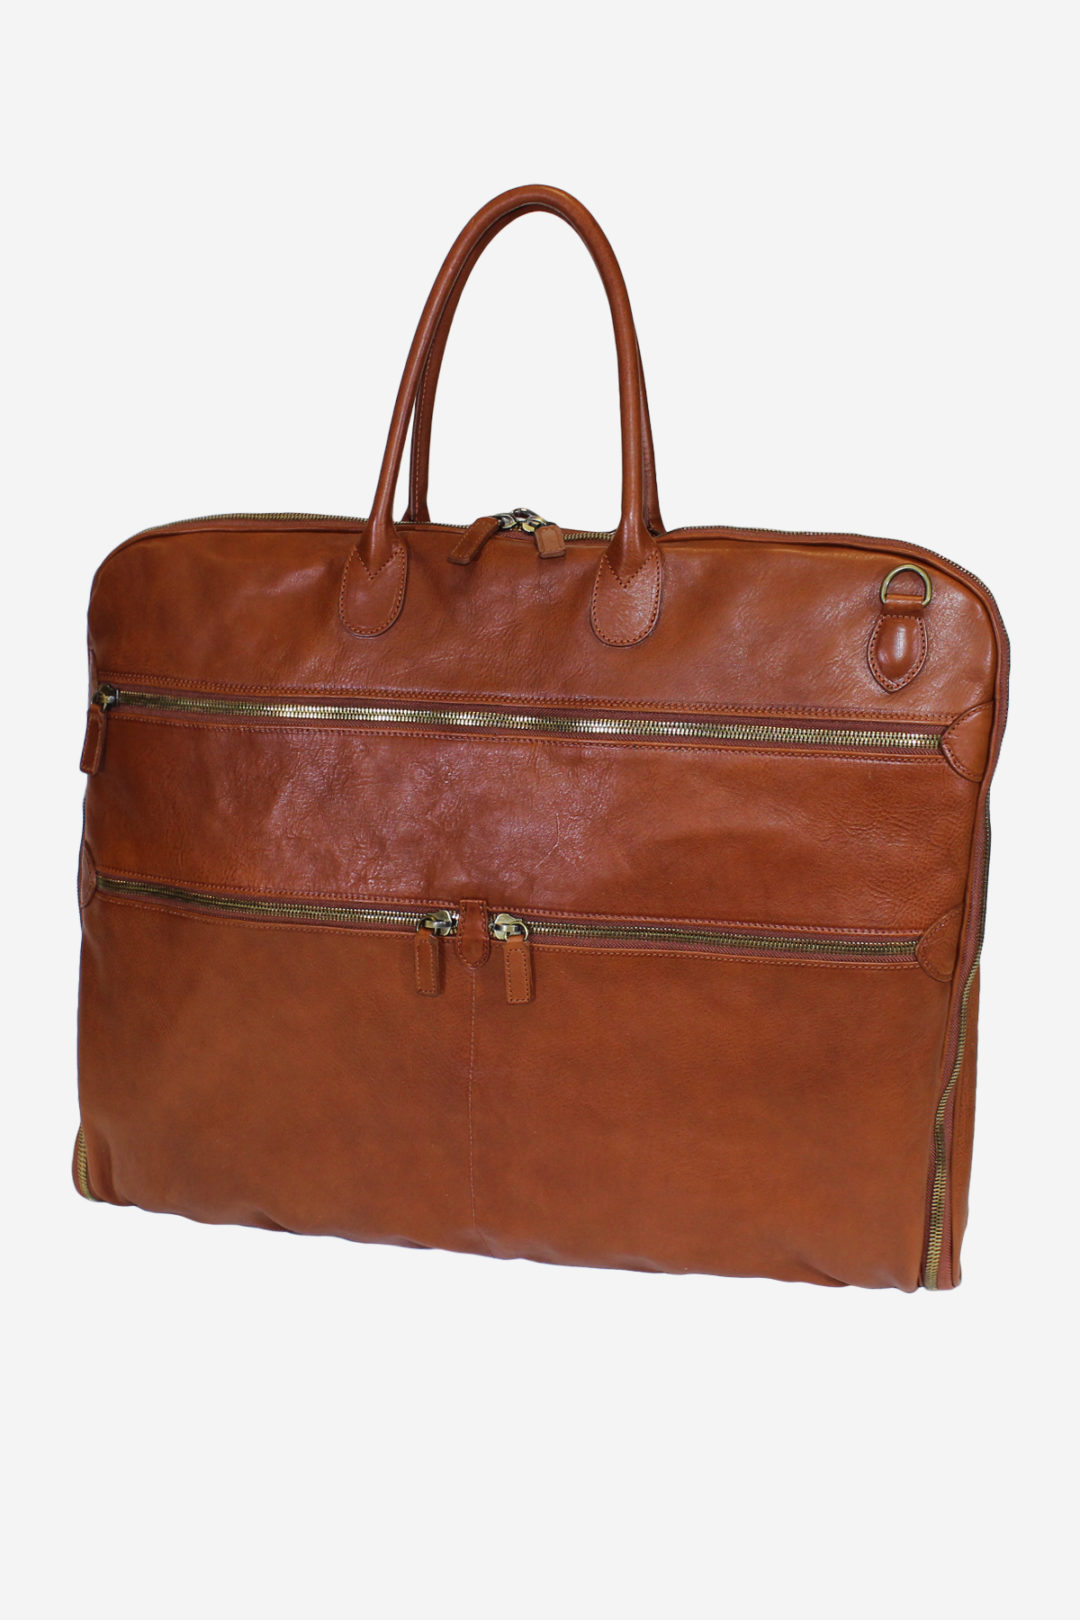 Antique Garment Bag - Terrida Made in Italy, vegetable tan leather